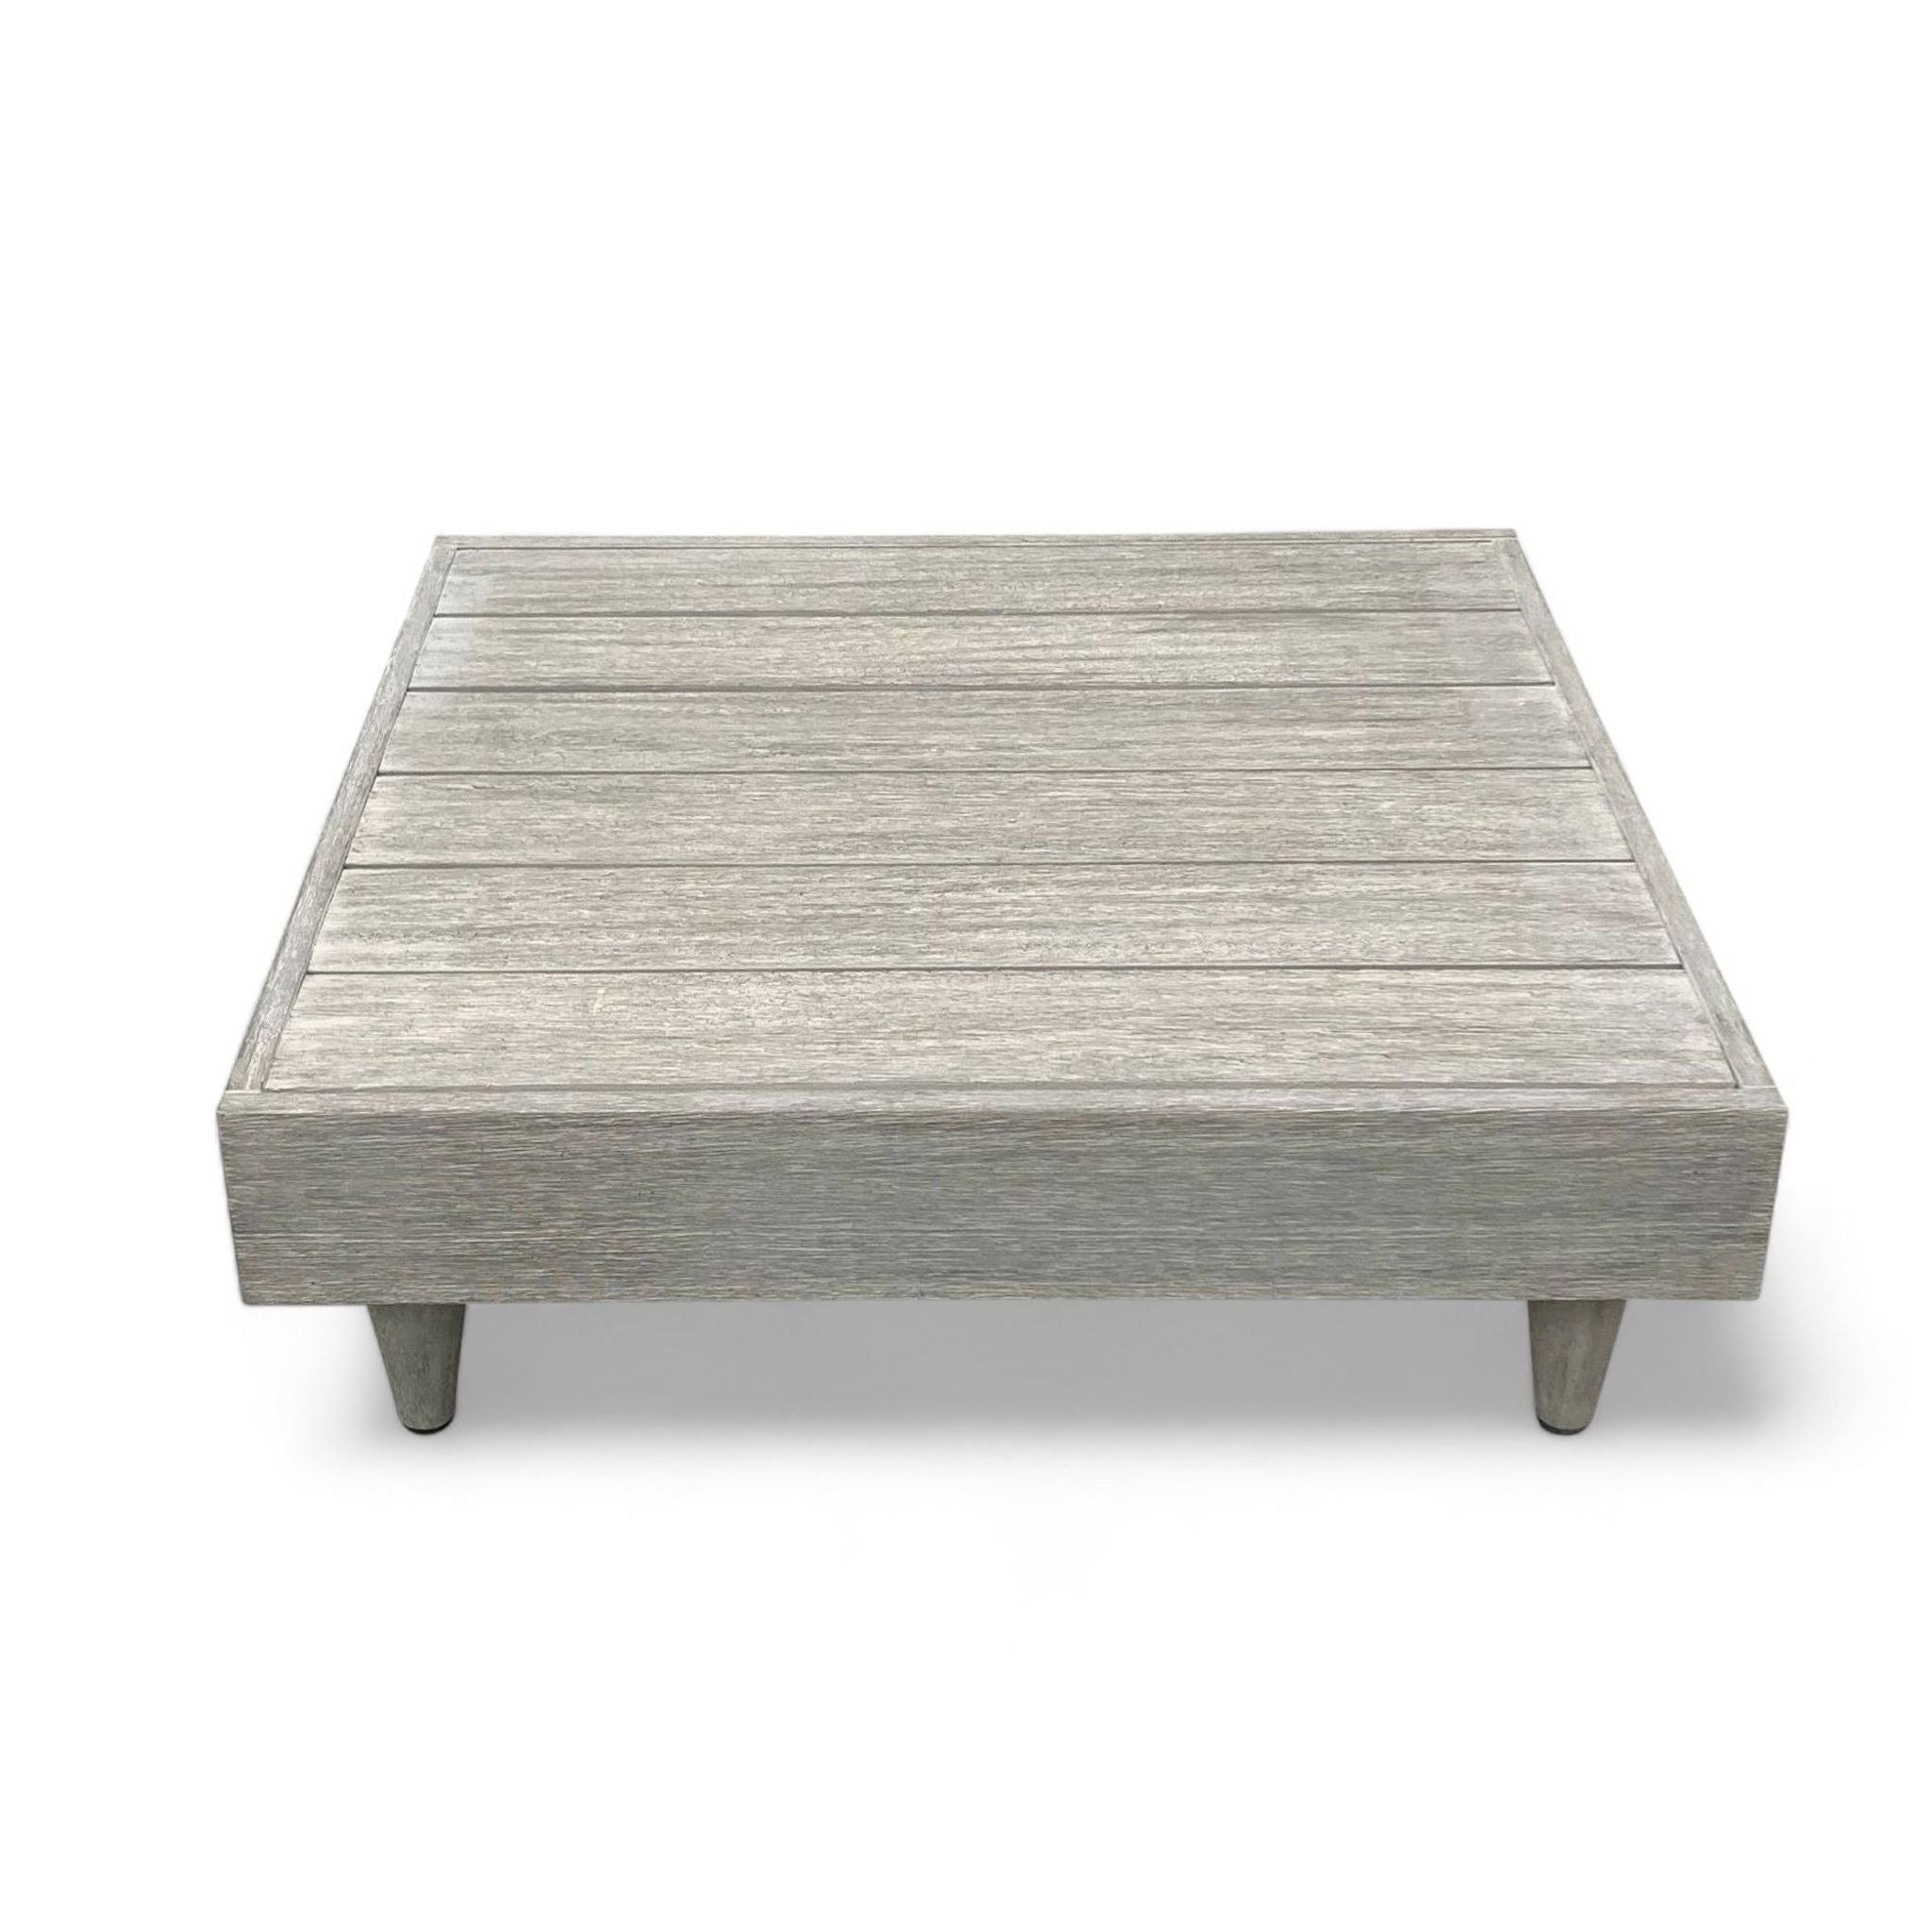 West Elm Telluride square coffee table in light wood, 32 inches with plank-style top and short legs.